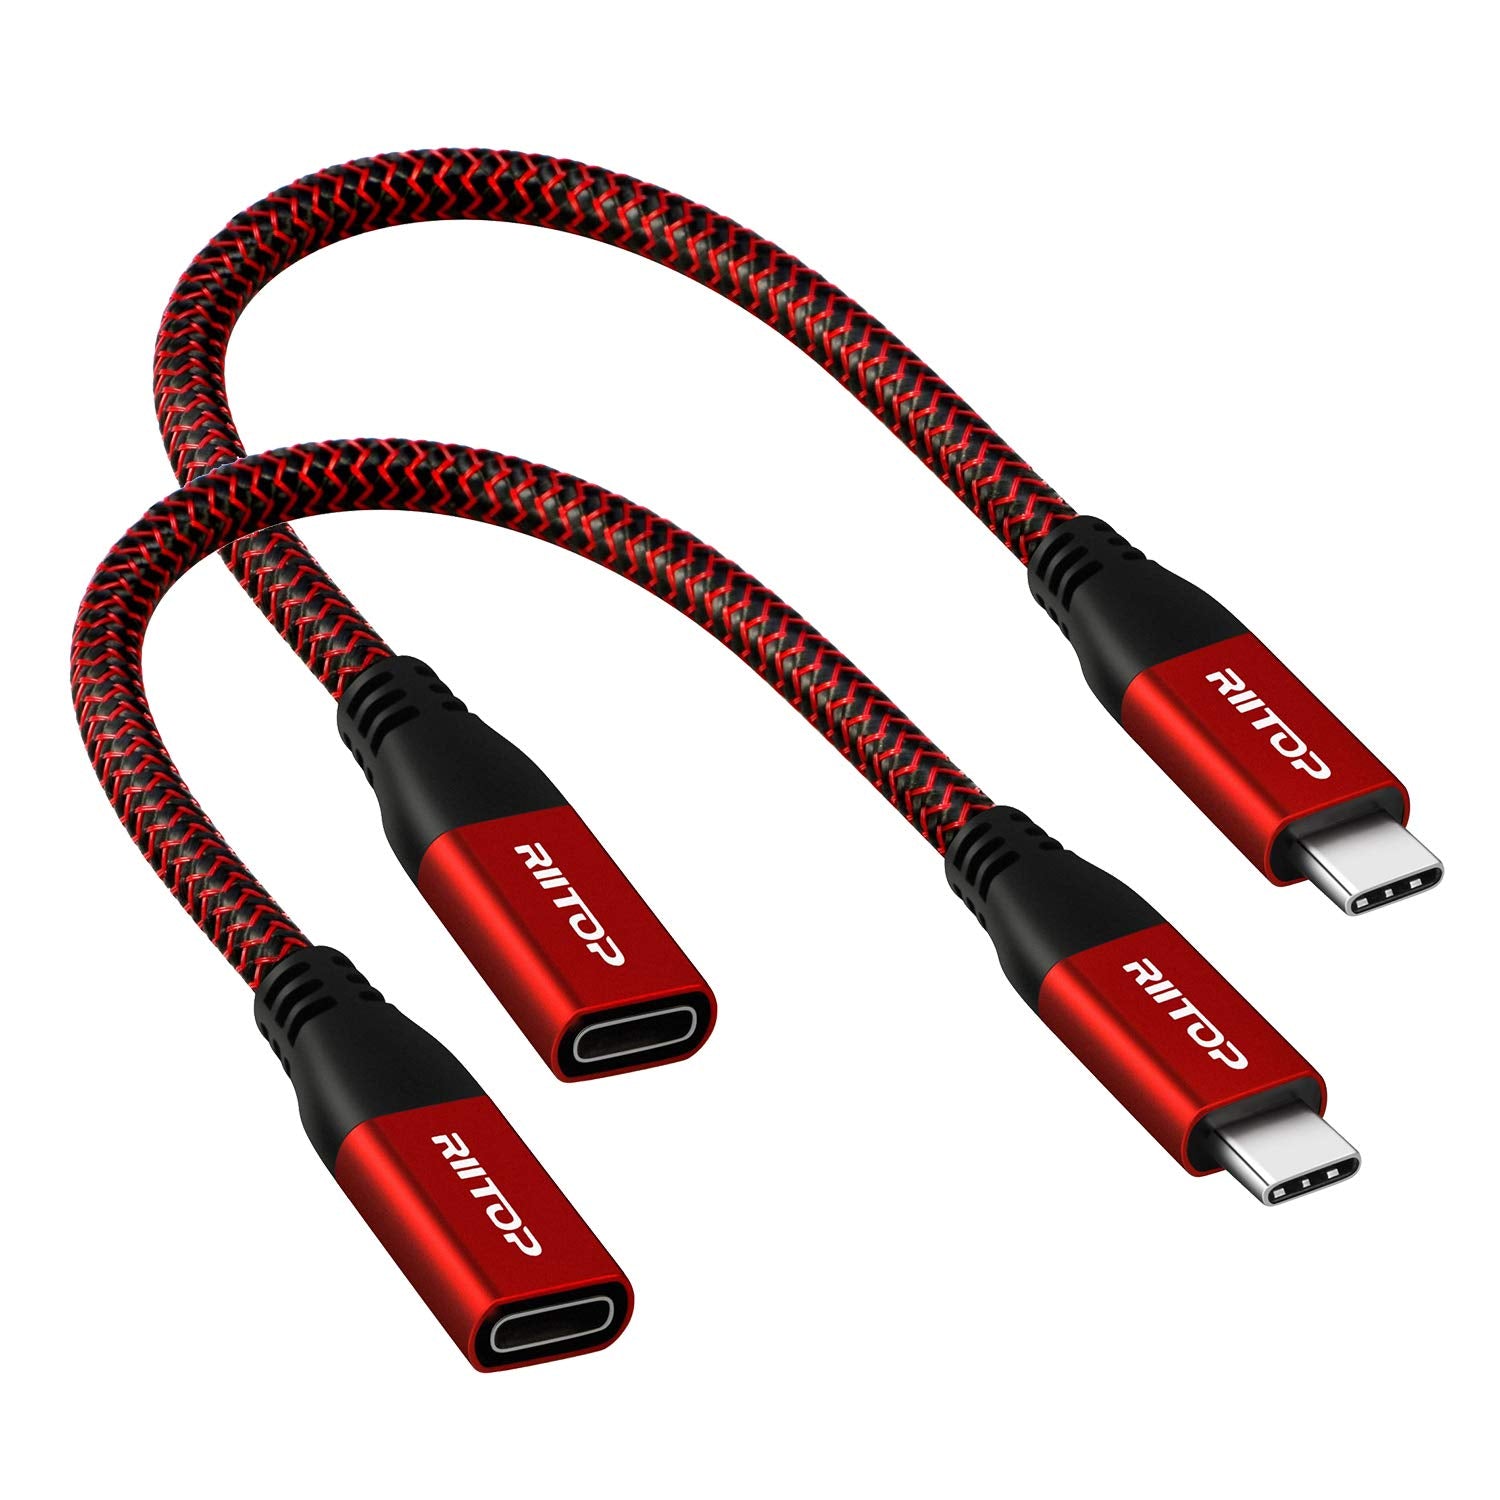 USB Extension Cable Short 7.8 inch (2Pack), RIITOP C Male to Fem